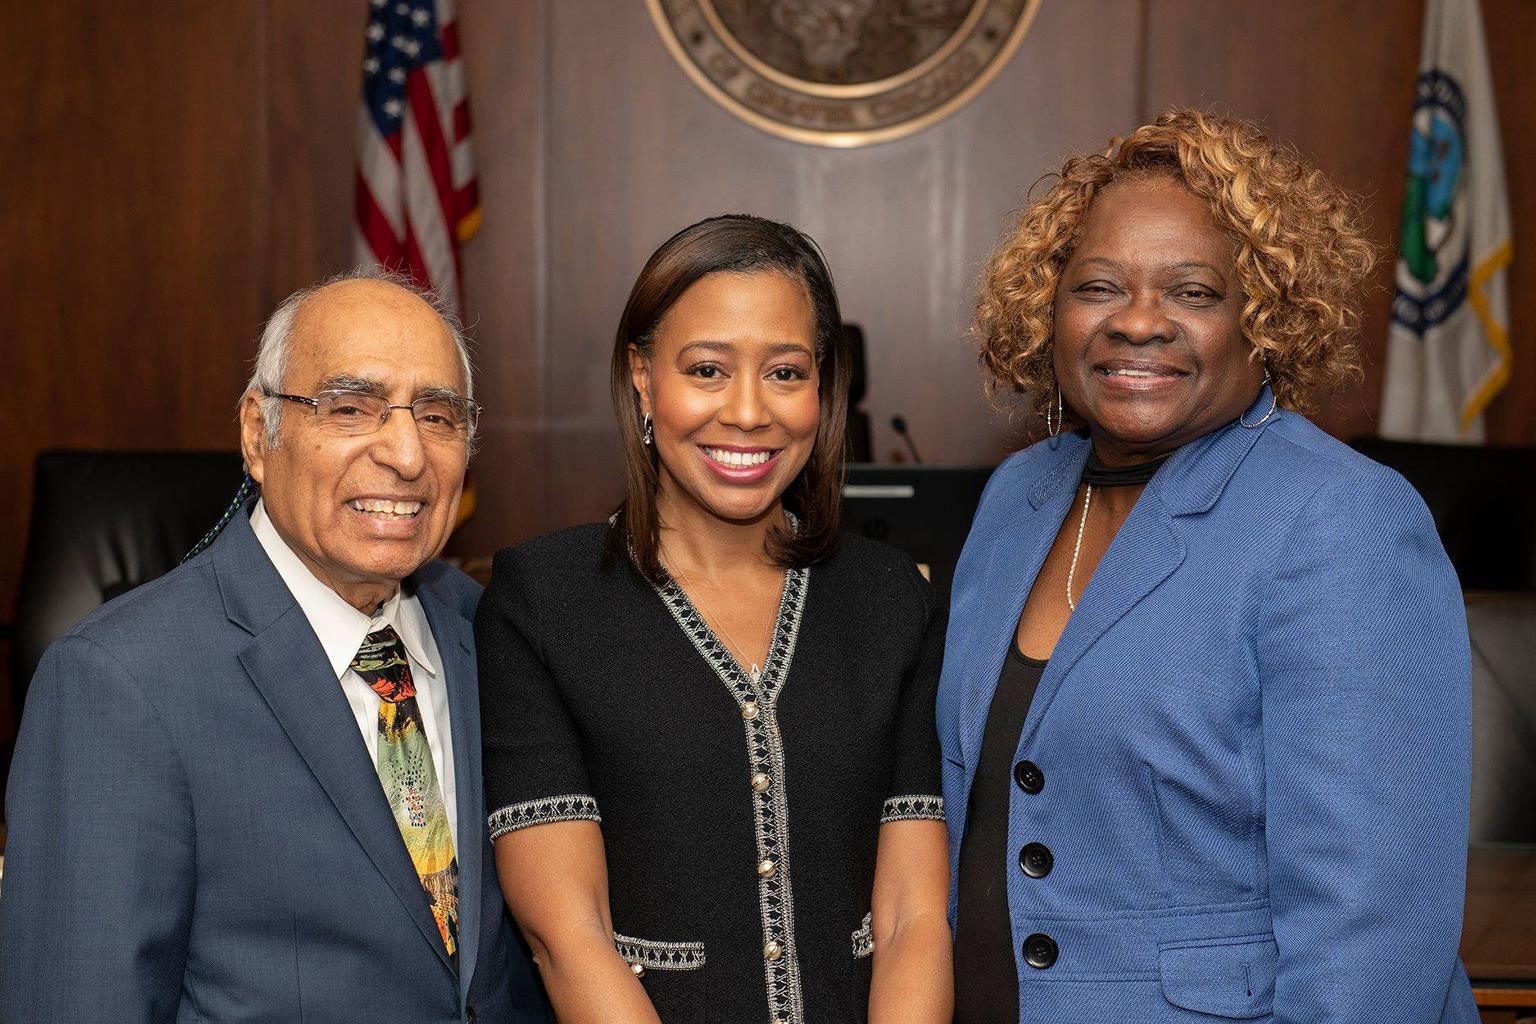 Newly elected MWRD President Kari Steele (center) with Finance Chairman Frank Avila and Vice President Barbara McGowan (Metropolitan Water Reclamation District of Greater Chicago) 